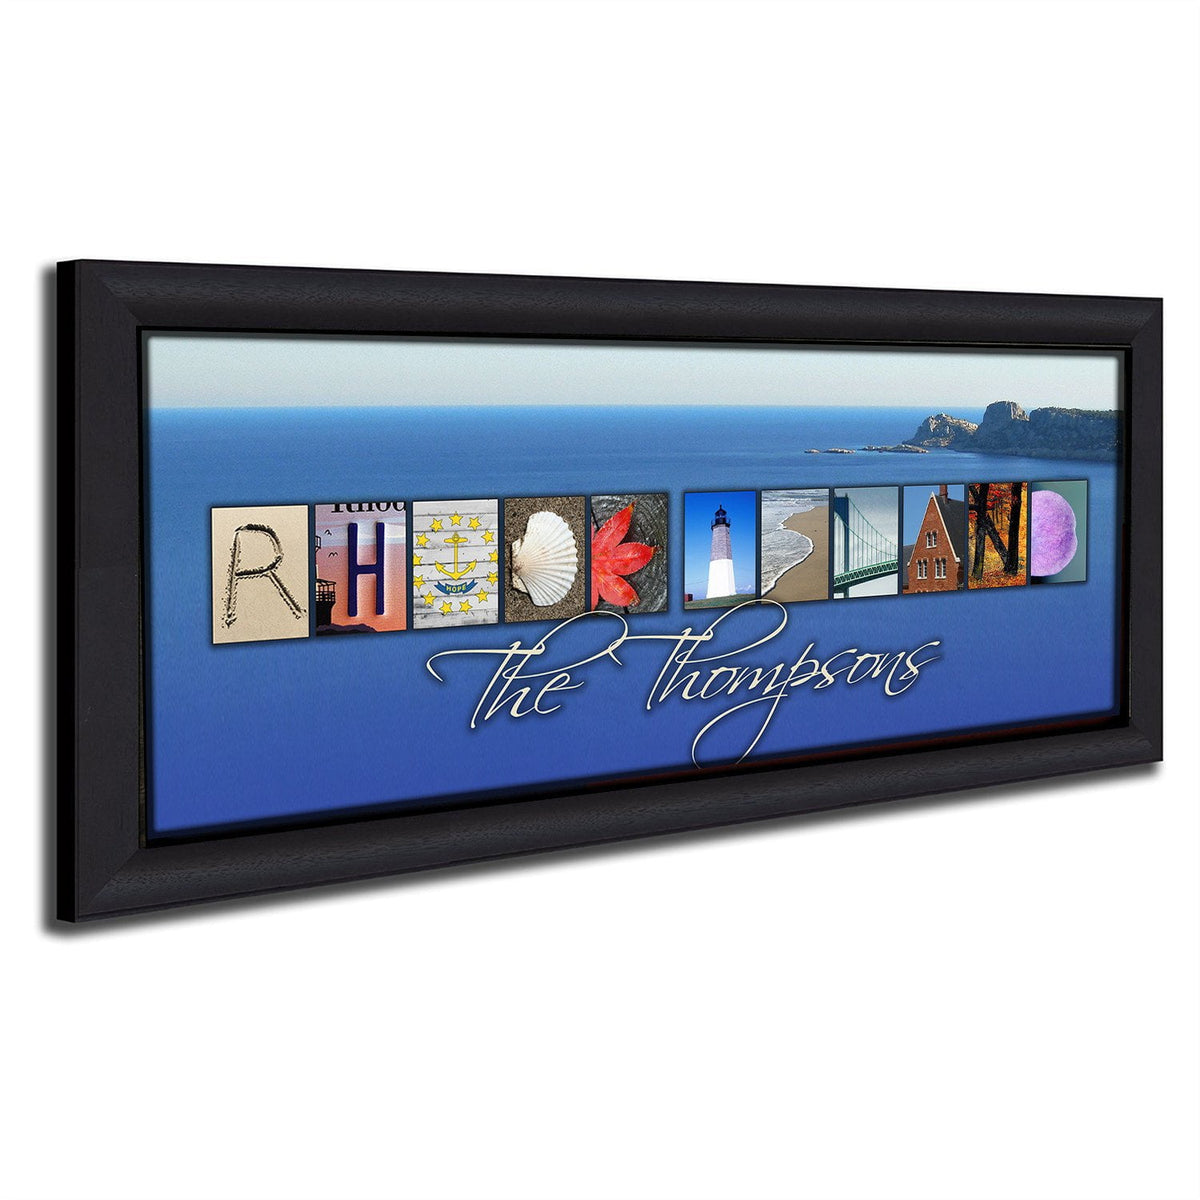 Rhode Island Canvas Art - Personalized gift from Personal-Prints